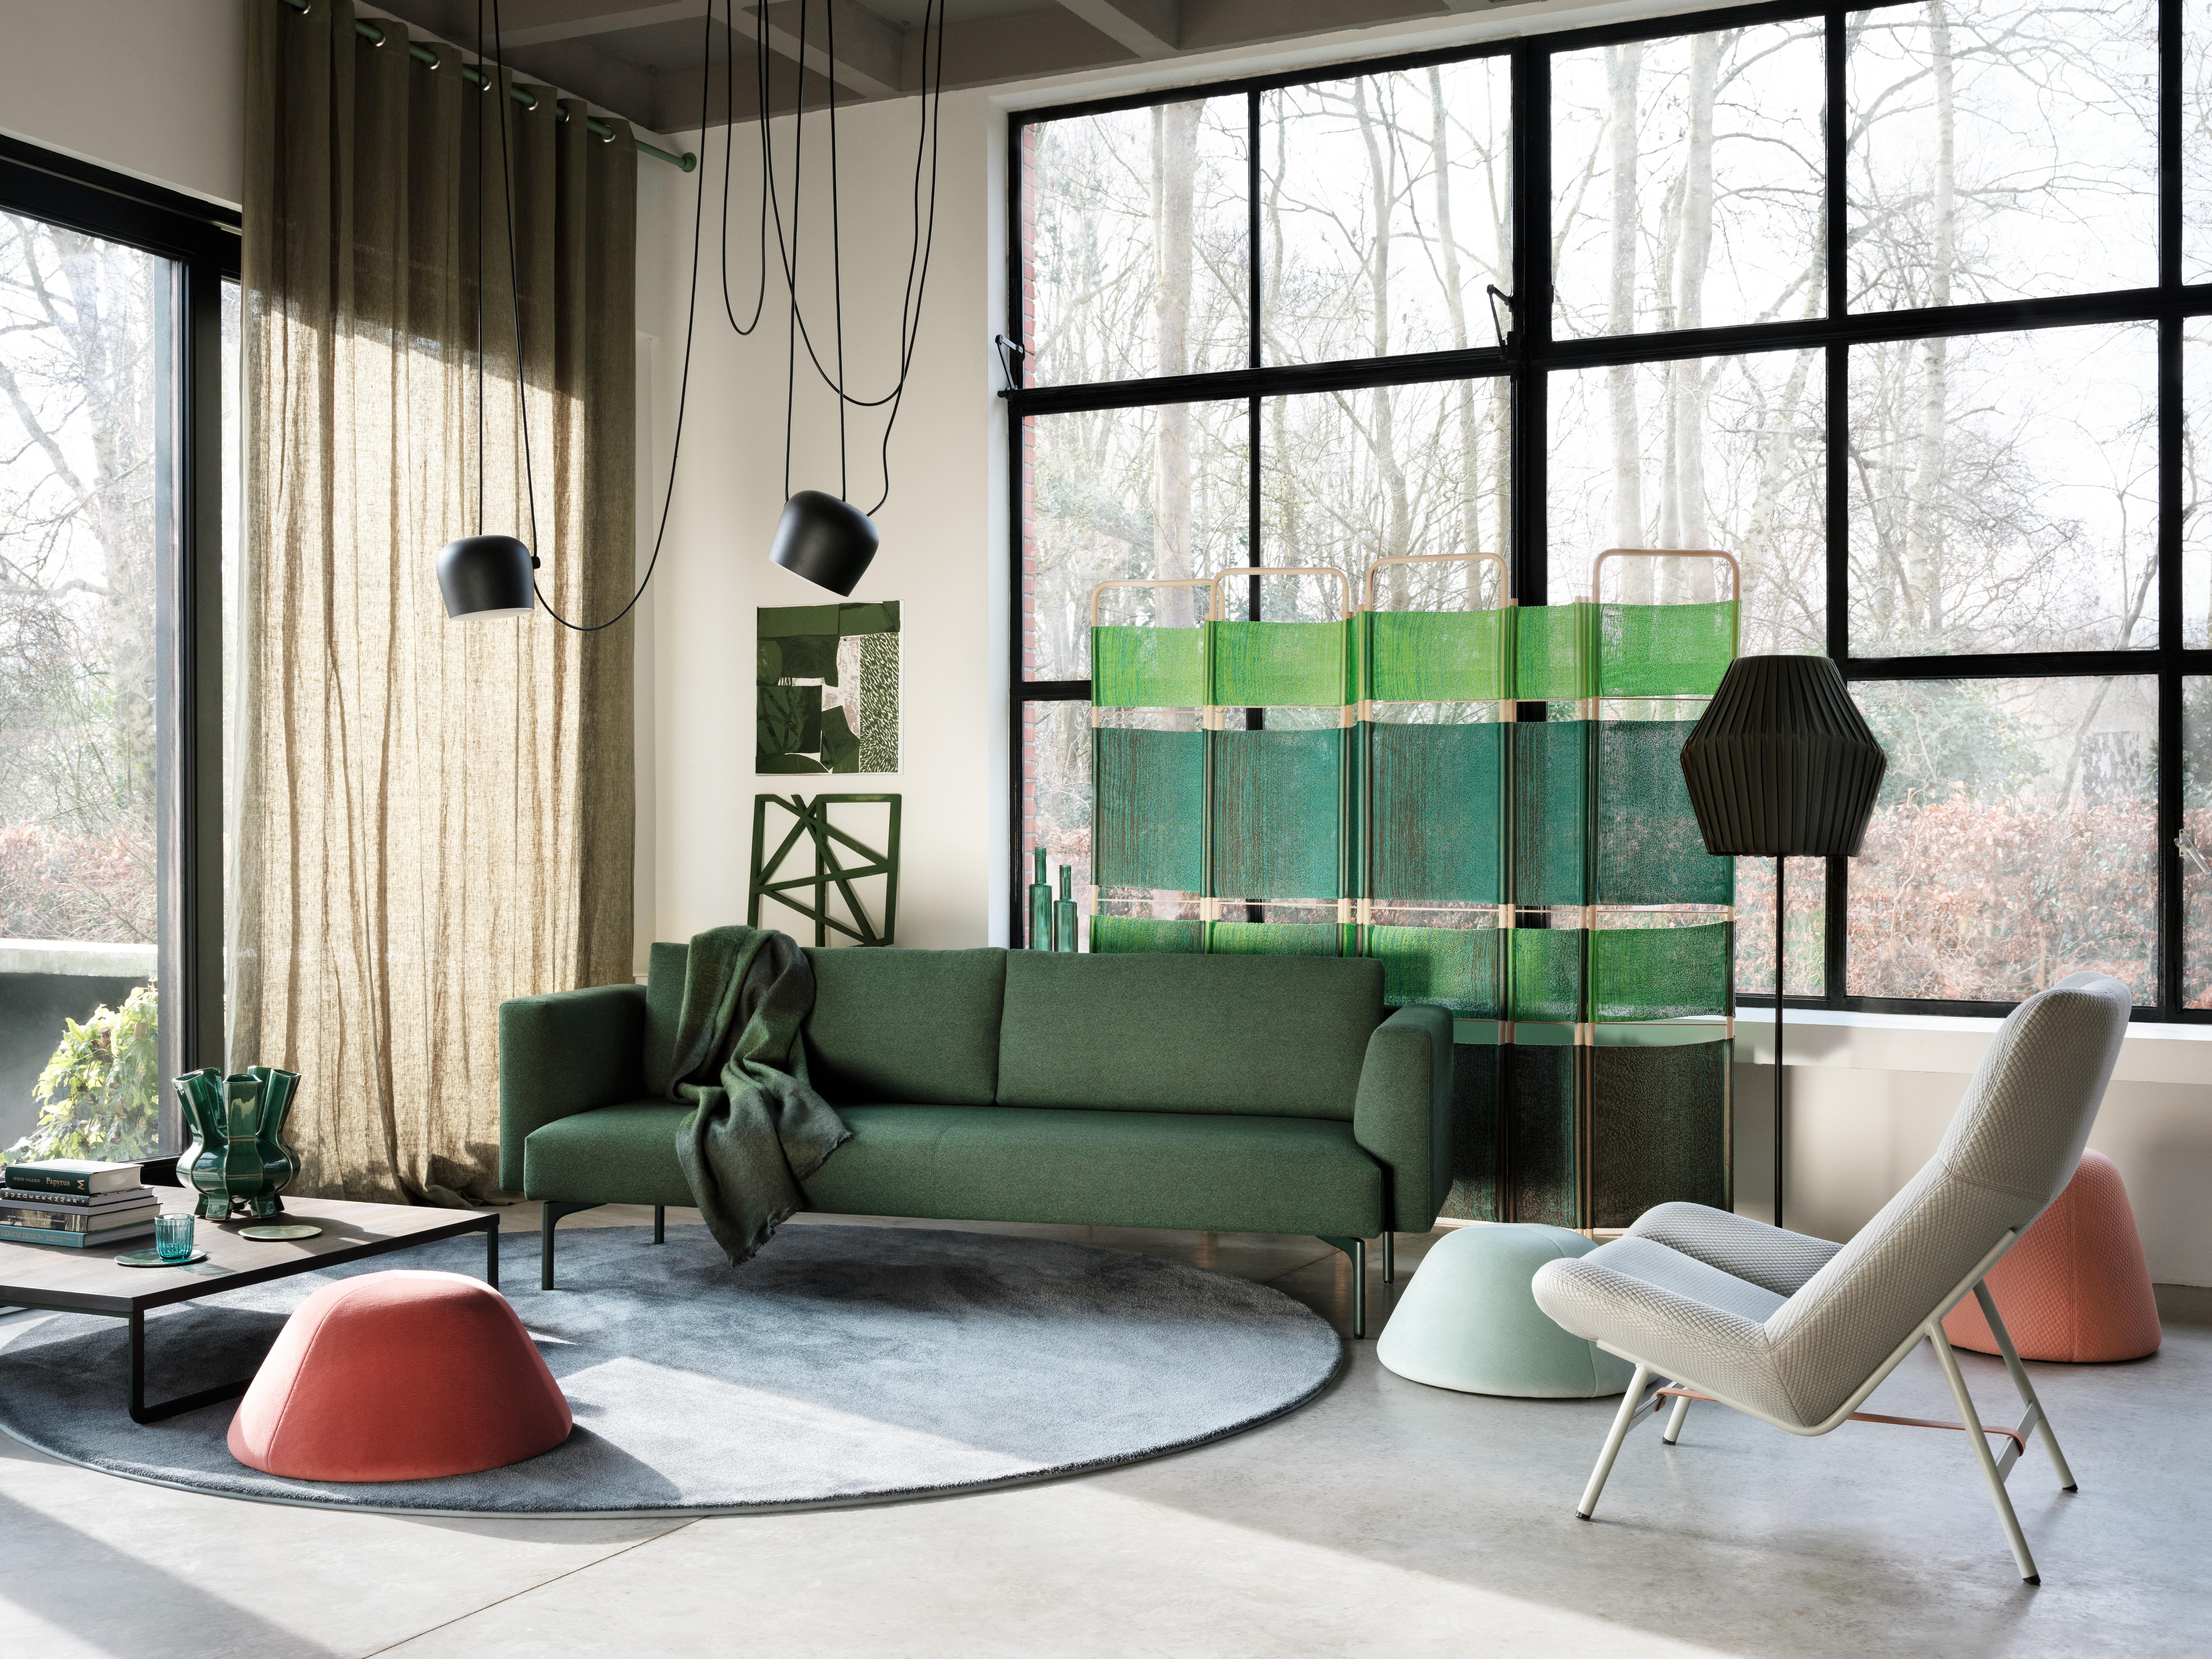 Modern, soft and welcoming, with wonderful seating comfort, Arris is an elegant sofa programme with inviting loose back cushions. 

Perched high on its beautifully cast aluminum legs and with a wide selection of sofa options, Arris perfectly suits